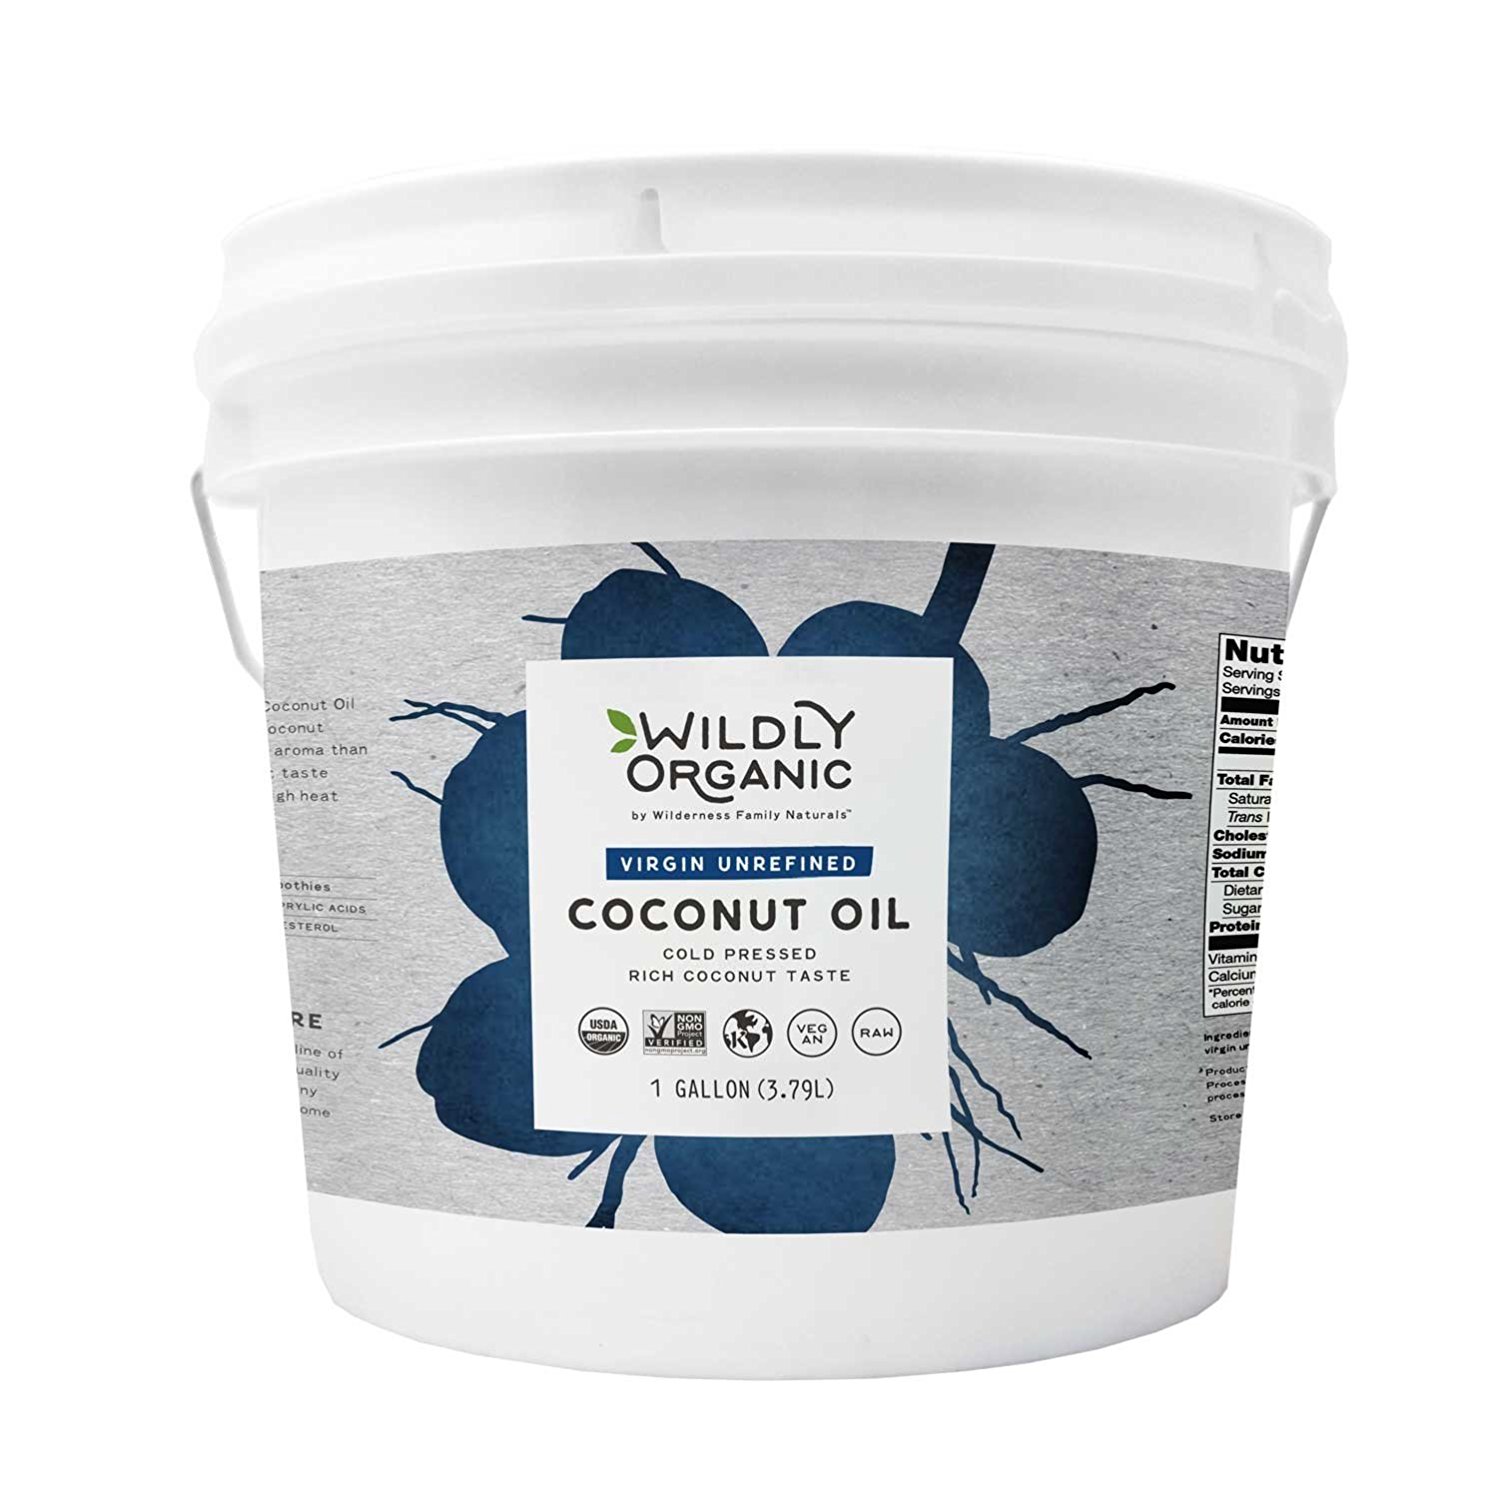 Buying coconut oil in bulk is wise when you use it for everything! 